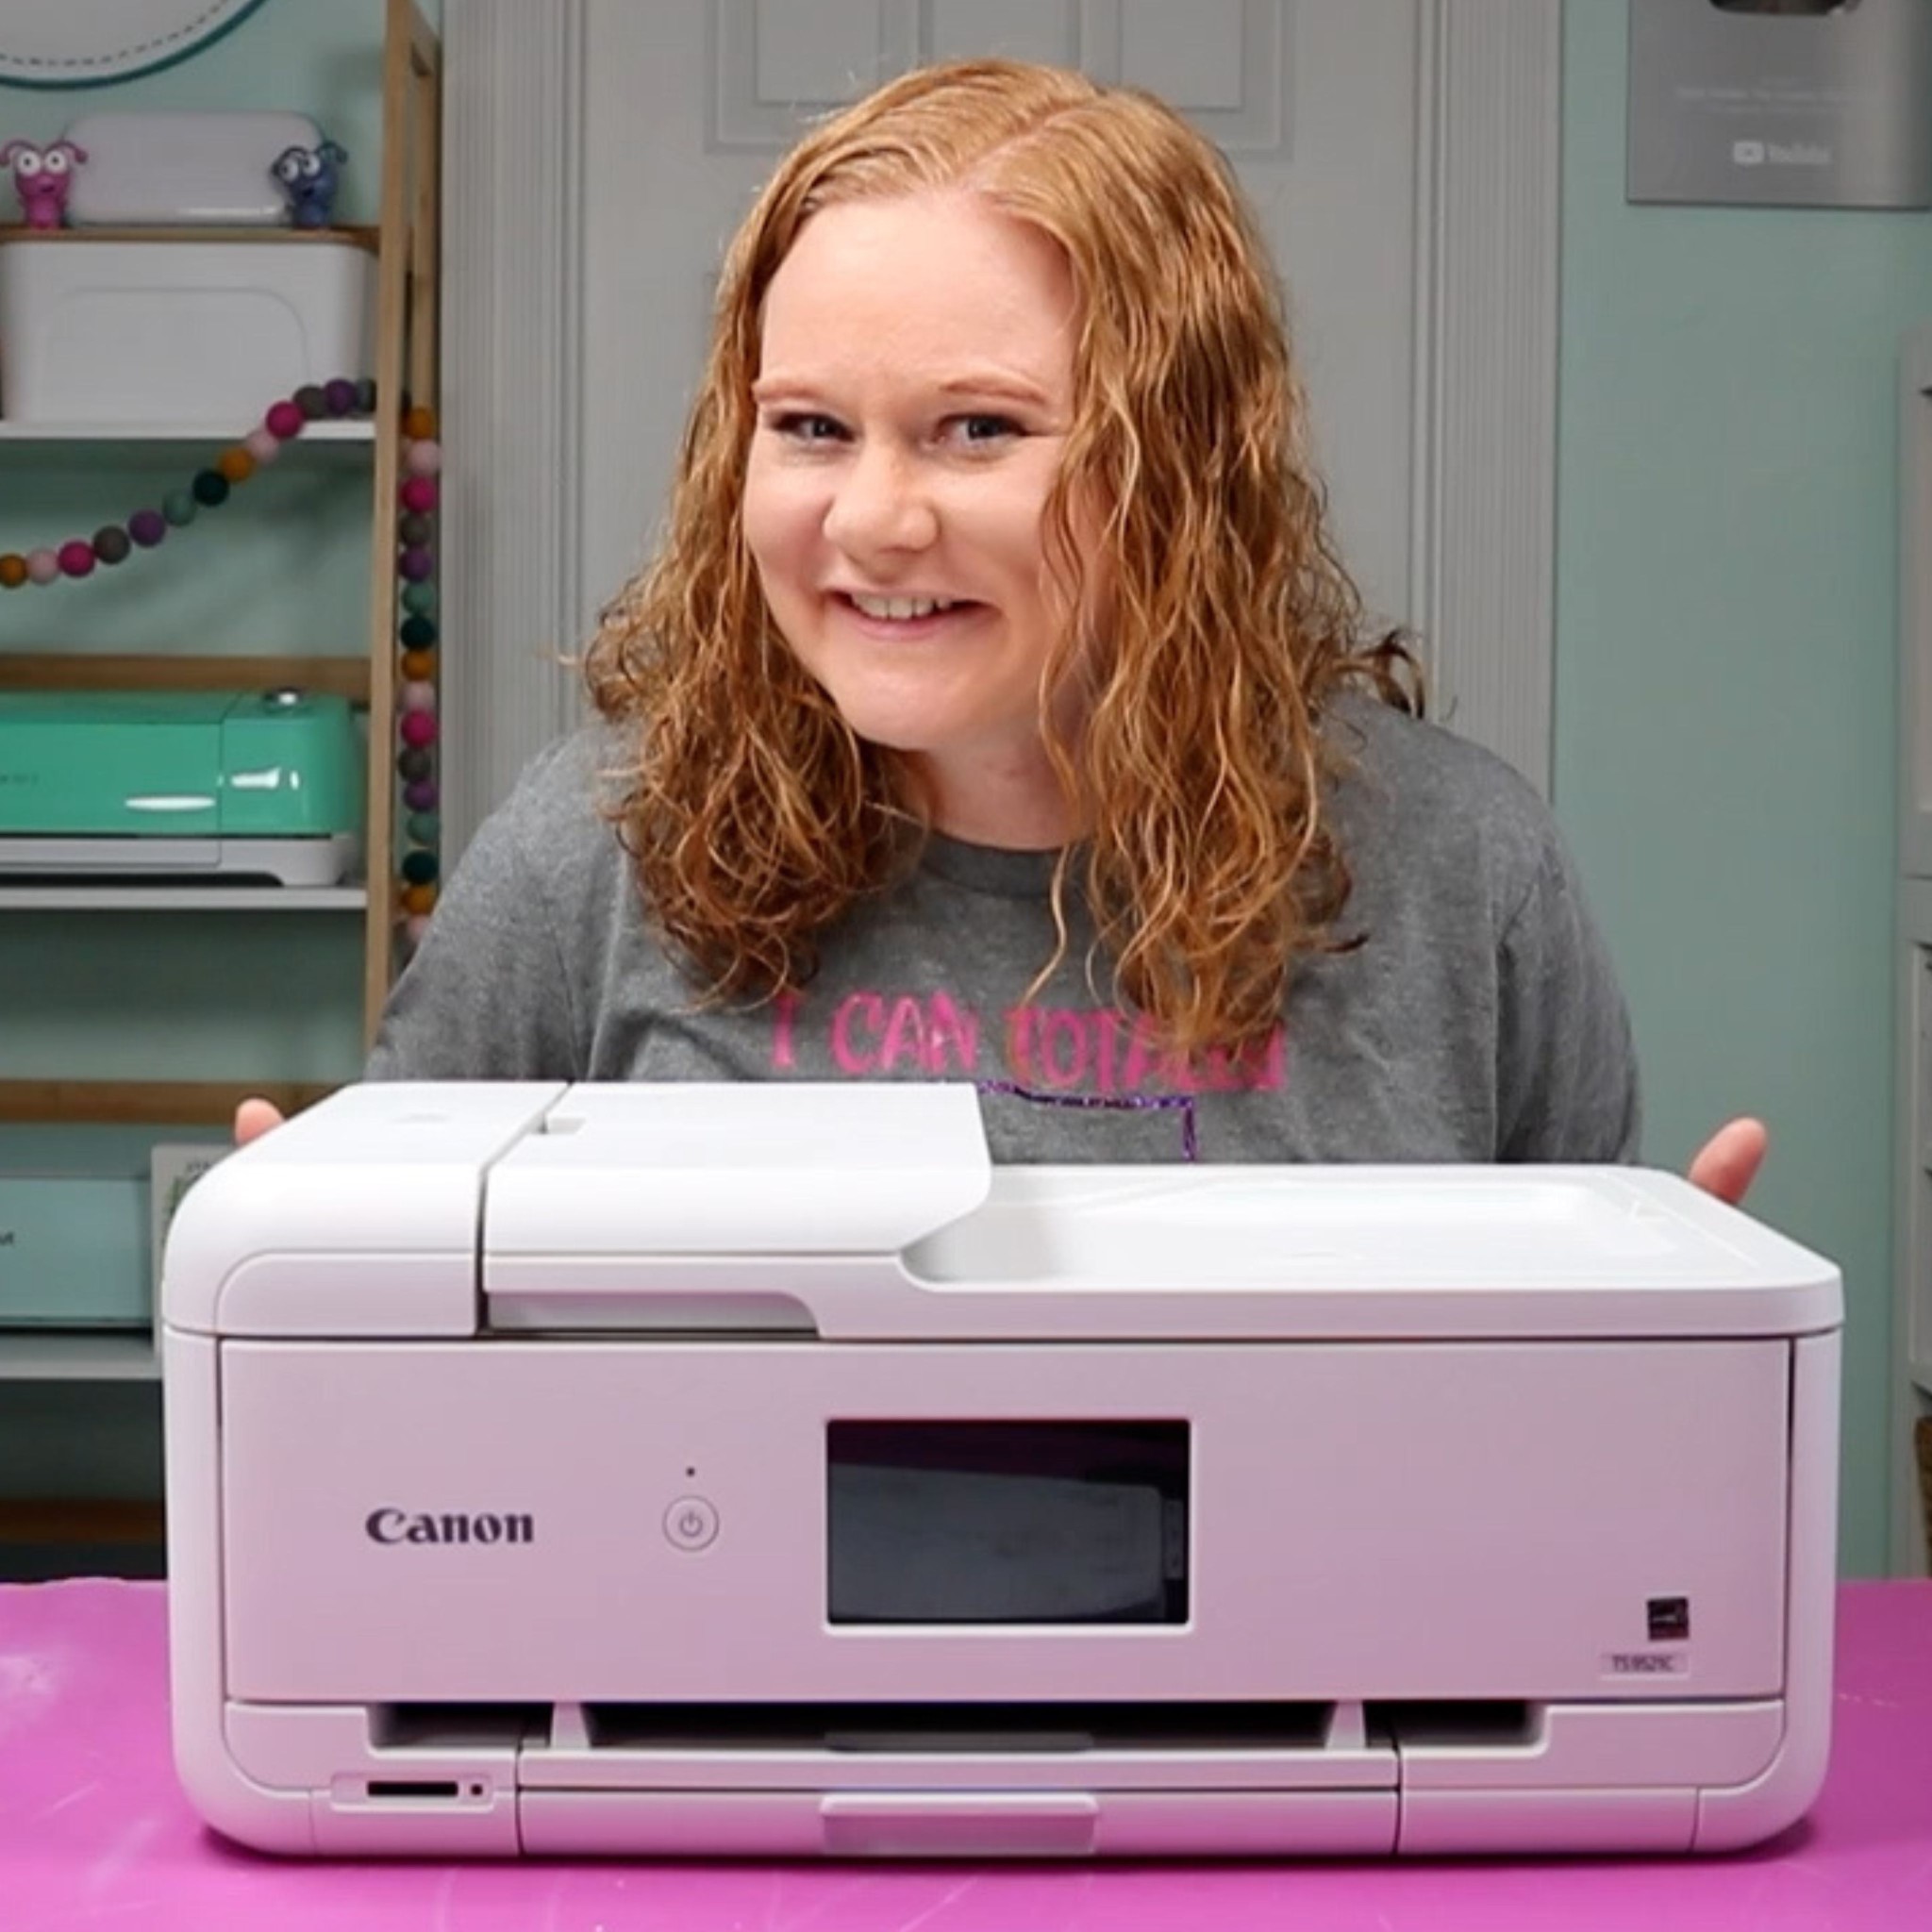 Large-Format Printers - Which One is Right for - Angie Holden Country Chic Cottage